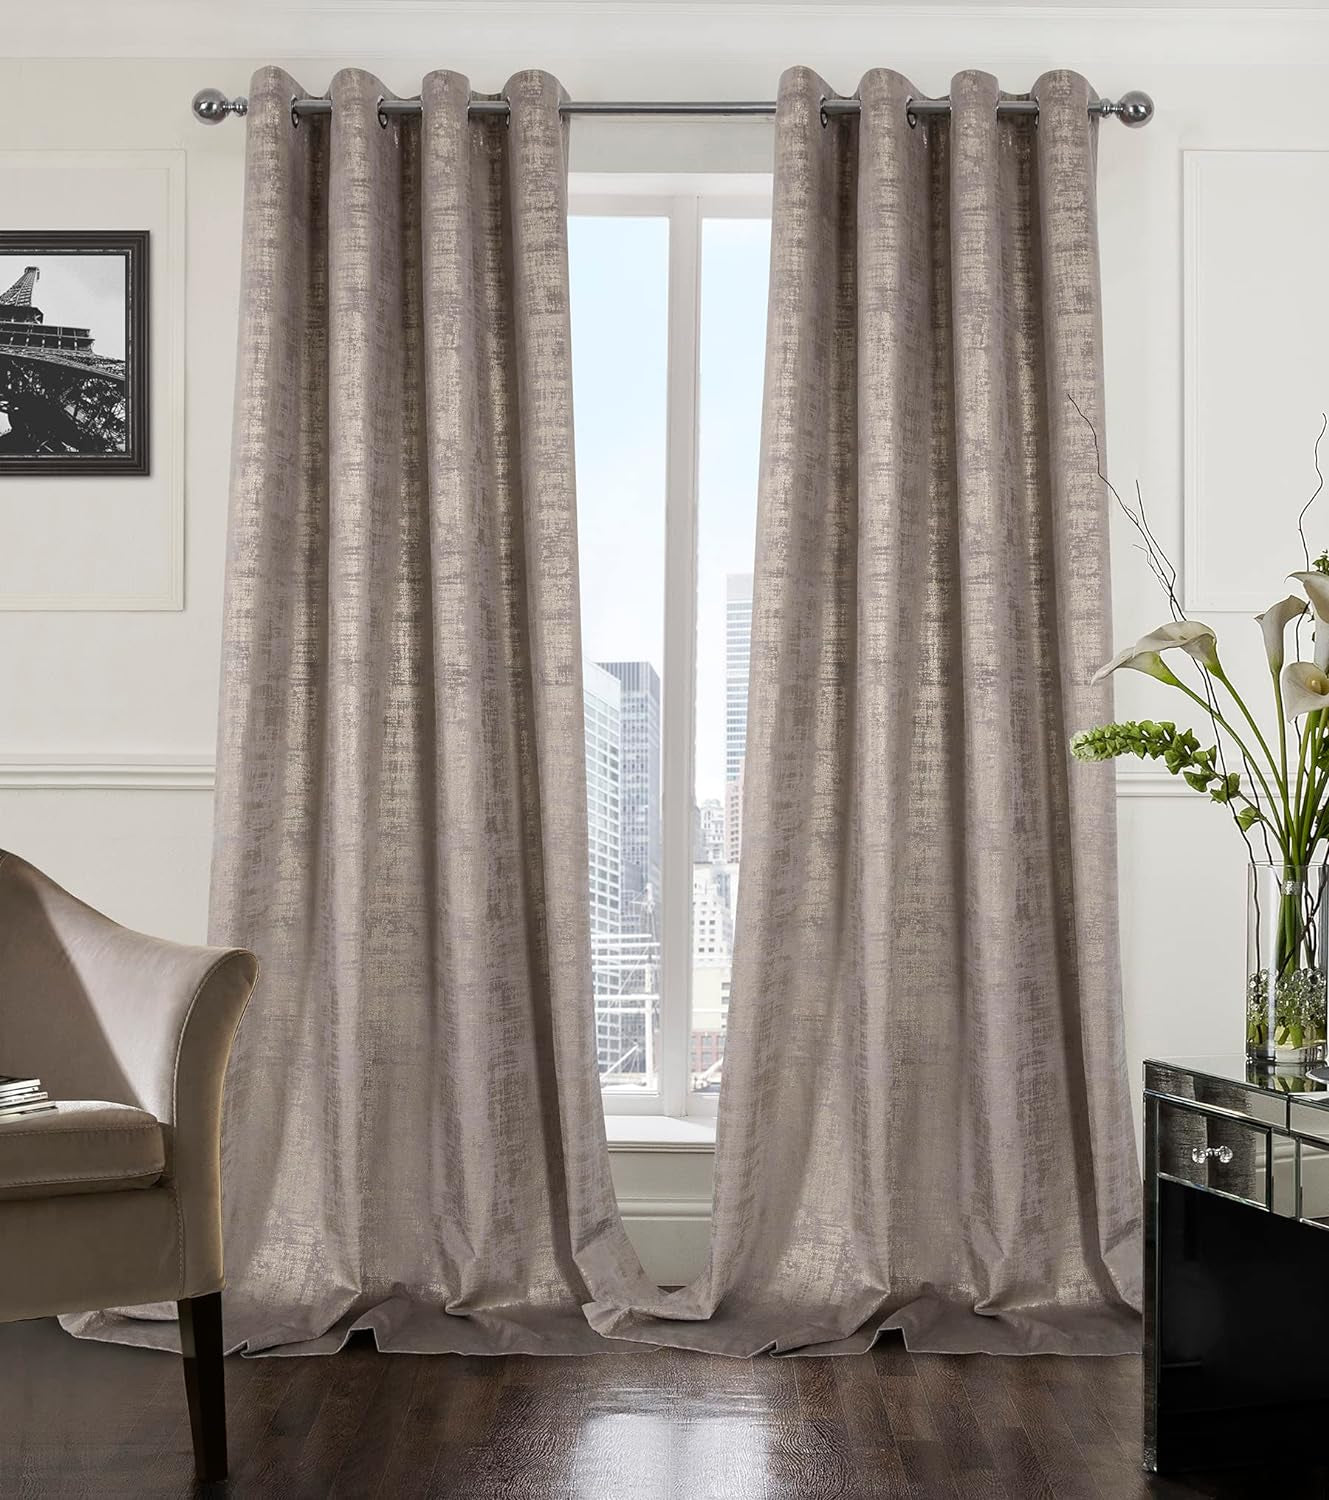 Always4U Soft Velvet Curtains 95 Inch Length Luxury Bedroom Curtains Gold Foil Print Window Curtains for Living Room 1 Panel White  always4u Champagne (Gold Print) 2 Panels: 52''W*108''L 